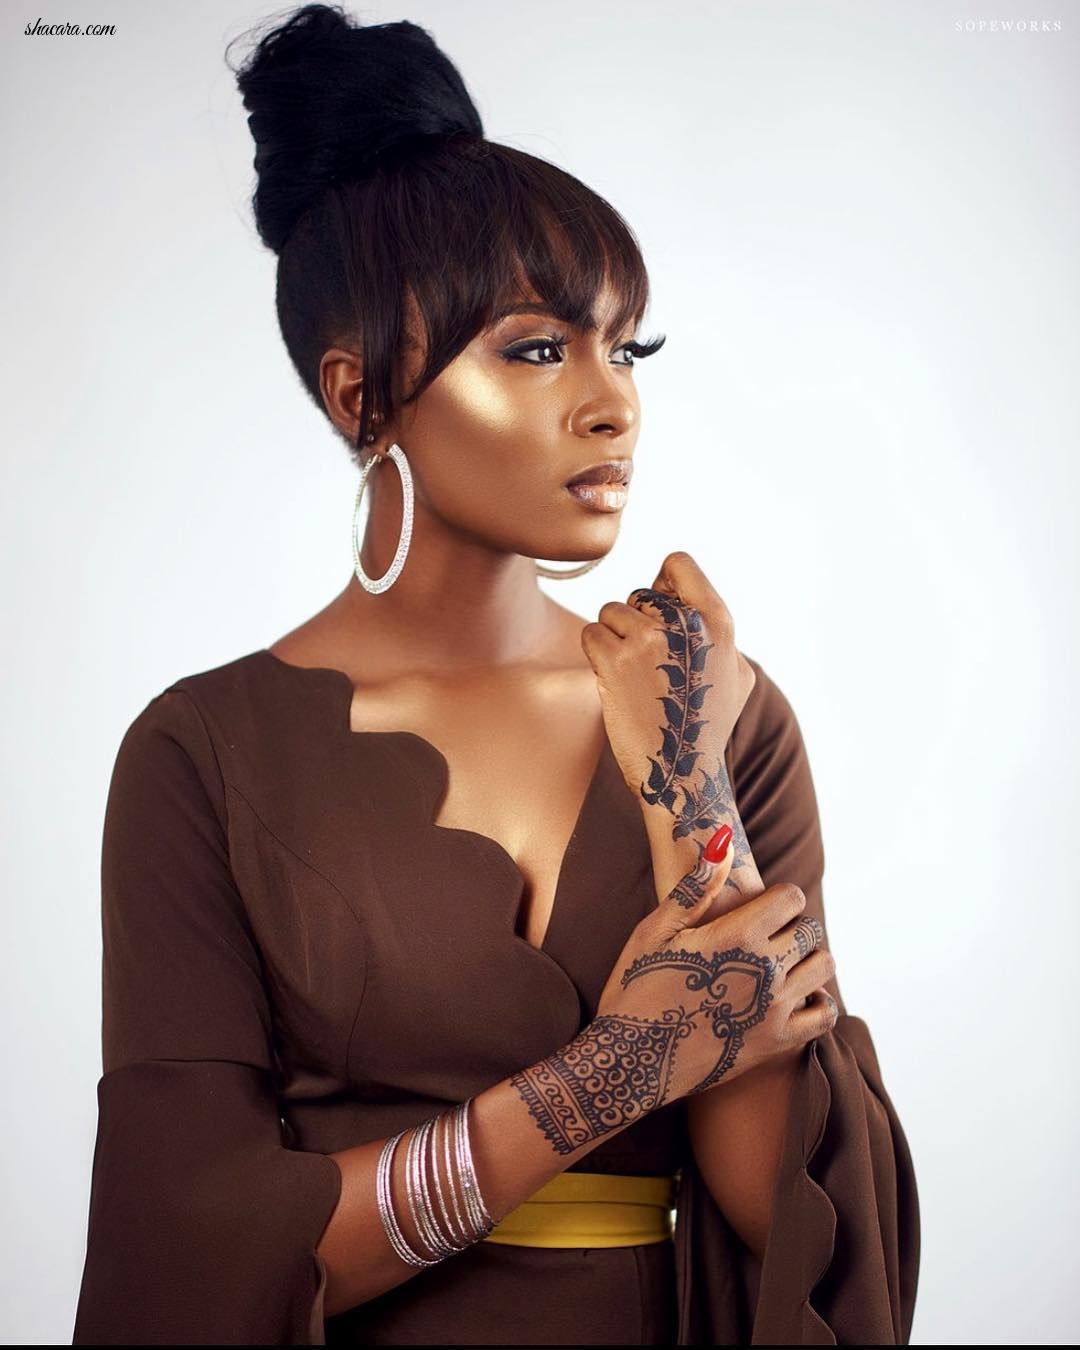 Jemimi Osunde Is A Golden Beauty In Gorgeous New Photos